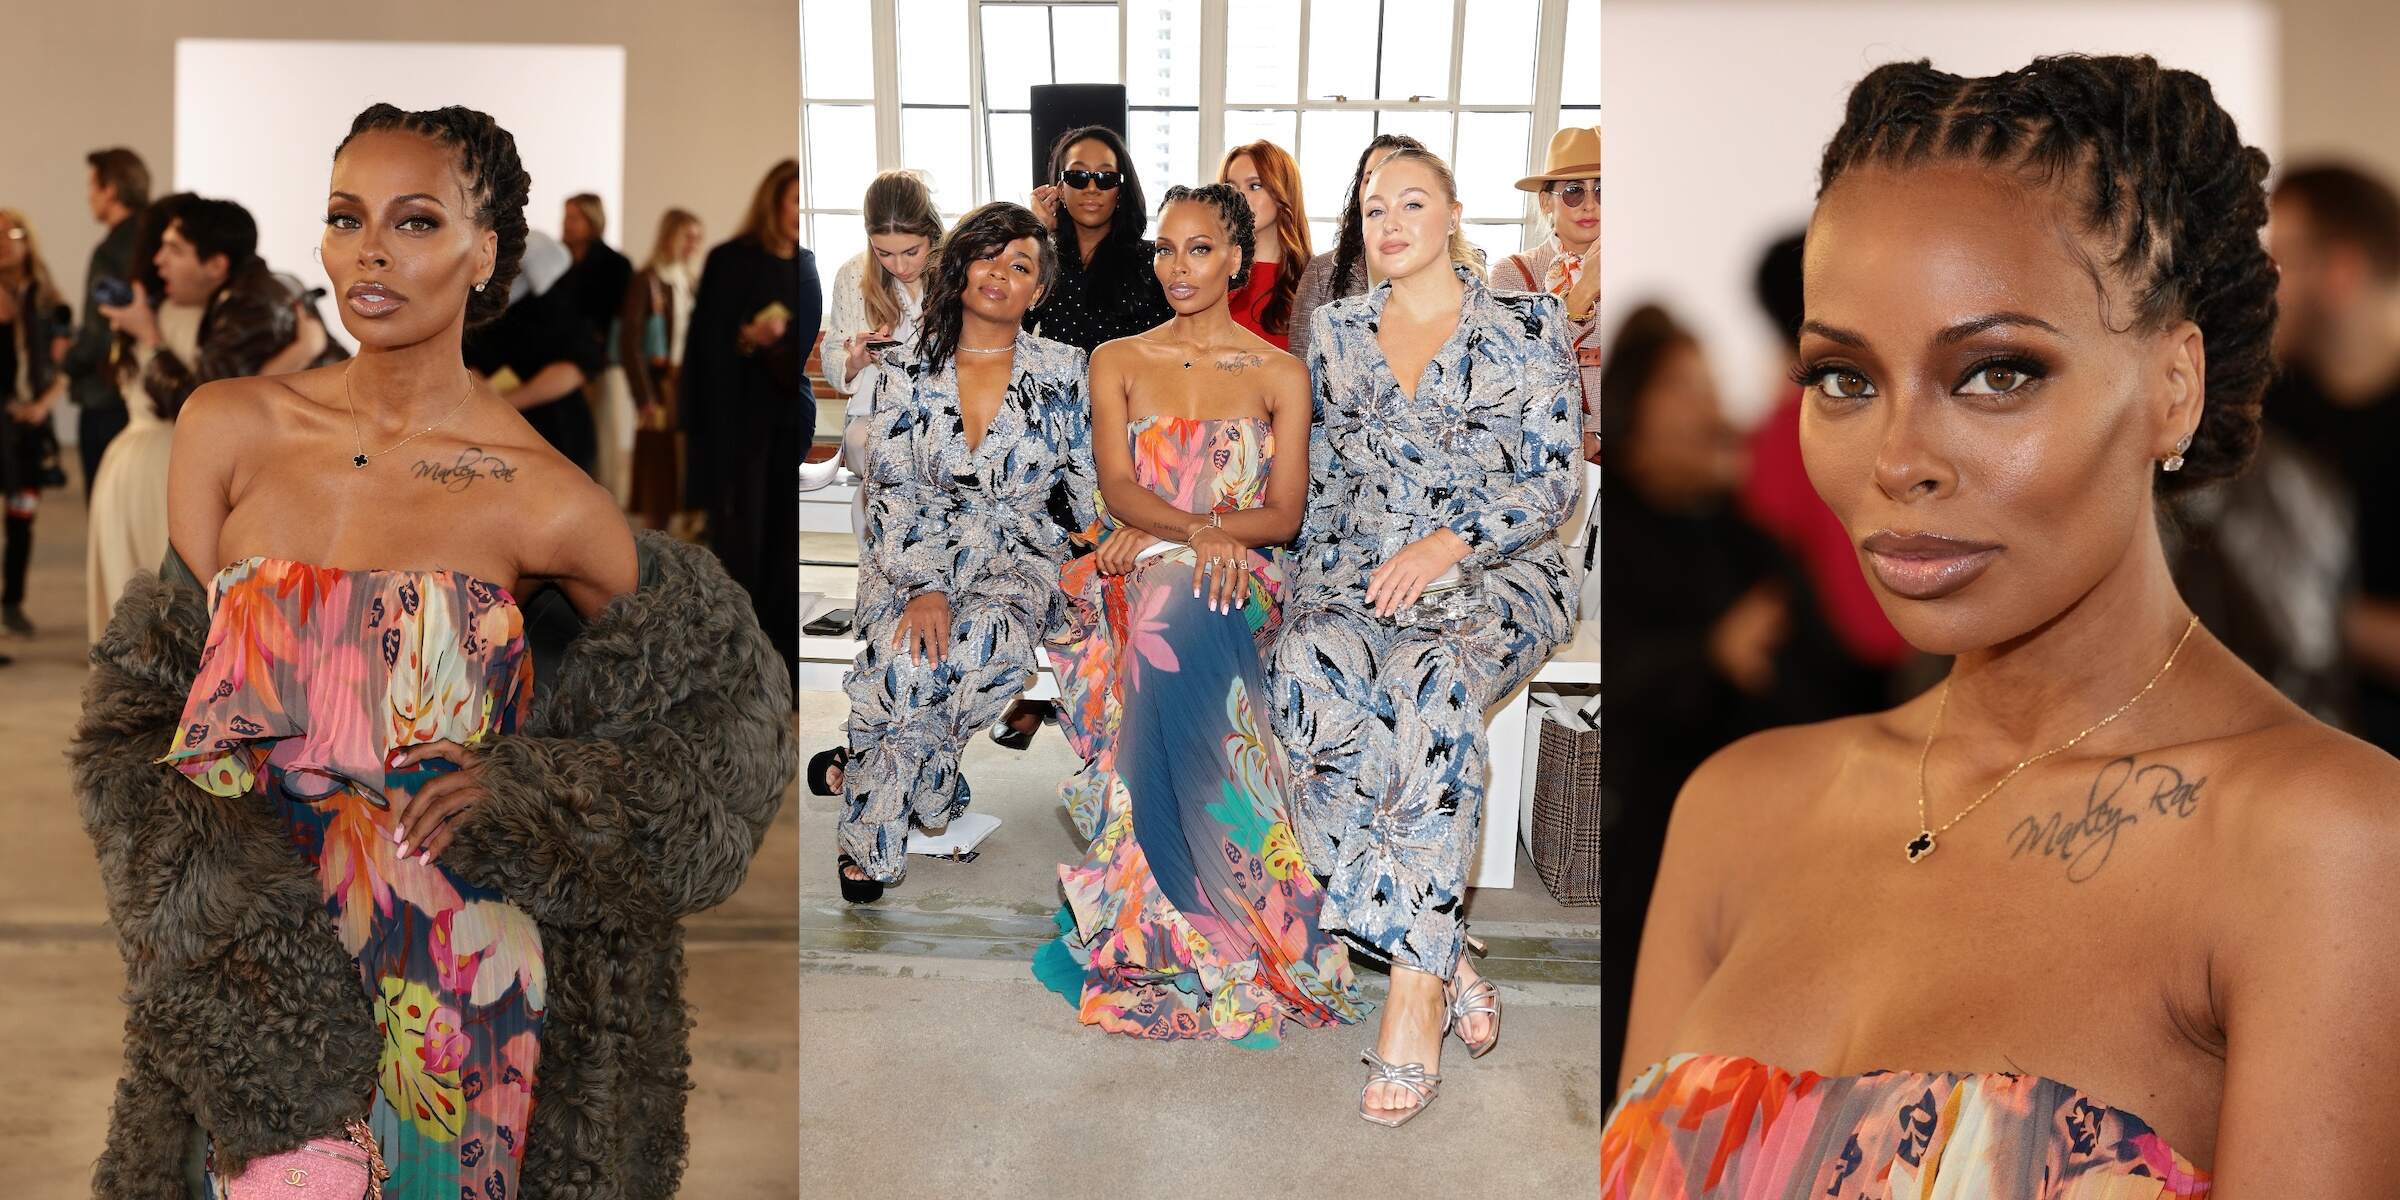 Alexis Floyd, Eva Marcille, and Iskra Lawrence attend the Badgley Mischka fashion show with Eva wearing a multicolor strapless gown and braids